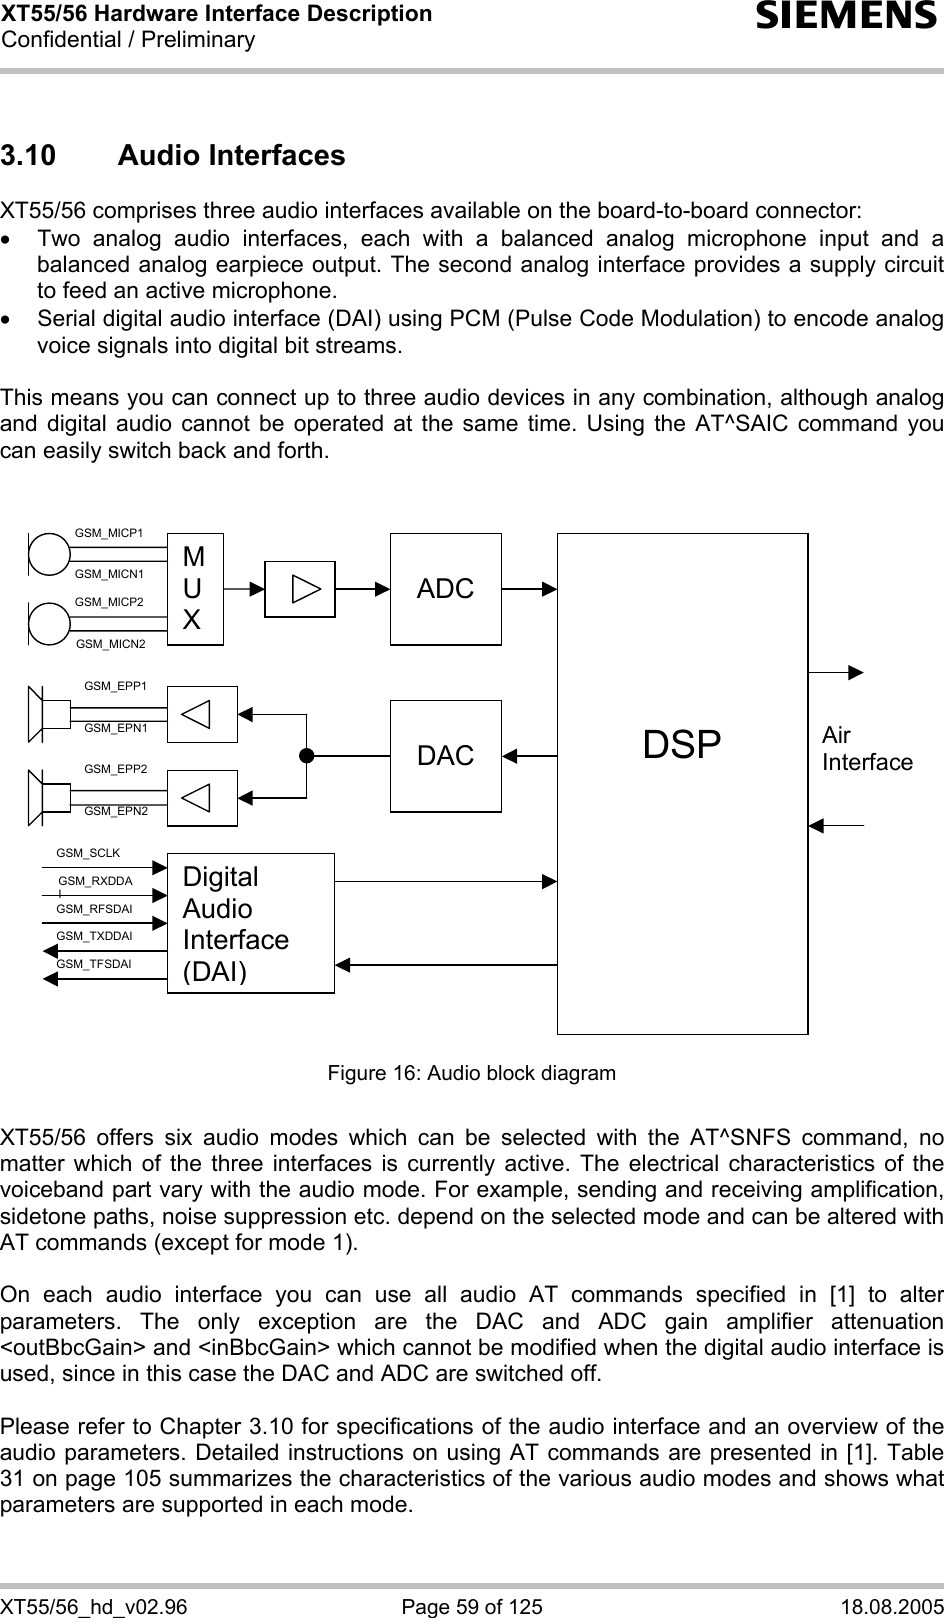 XT55/56 Hardware Interface Description Confidential / Preliminary s XT55/56_hd_v02.96  Page 59 of 125  18.08.2005 3.10 Audio Interfaces XT55/56 comprises three audio interfaces available on the board-to-board connector:  •  Two analog audio interfaces, each with a balanced analog microphone input and a balanced analog earpiece output. The second analog interface provides a supply circuit to feed an active microphone. •  Serial digital audio interface (DAI) using PCM (Pulse Code Modulation) to encode analog voice signals into digital bit streams.  This means you can connect up to three audio devices in any combination, although analog and digital audio cannot be operated at the same time. Using the AT^SAIC command you can easily switch back and forth.    M U X  ADC     DSP  DAC Air InterfaceDigital Audio Interface (DAI)      GSM_MICP1      GSM_MICN1      GSM_MICP2 GSM_MICN2 GSM_EPP1 GSM_EPN1 GSM_EPP2 GSM_EPN2 GSM_SCLK GSM_RXDDAI GSM_TFSDAI GSM_RFSDAI GSM_TXDDAI  Figure 16: Audio block diagram  XT55/56 offers six audio modes which can be selected with the AT^SNFS command, no matter which of the three interfaces is currently active. The electrical characteristics of the voiceband part vary with the audio mode. For example, sending and receiving amplification, sidetone paths, noise suppression etc. depend on the selected mode and can be altered with AT commands (except for mode 1).  On each audio interface you can use all audio AT commands specified in [1] to alter parameters. The only exception are the DAC and ADC gain amplifier attenuation &lt;outBbcGain&gt; and &lt;inBbcGain&gt; which cannot be modified when the digital audio interface is used, since in this case the DAC and ADC are switched off.  Please refer to Chapter 3.10 for specifications of the audio interface and an overview of the audio parameters. Detailed instructions on using AT commands are presented in [1]. Table 31 on page 105 summarizes the characteristics of the various audio modes and shows what parameters are supported in each mode. 